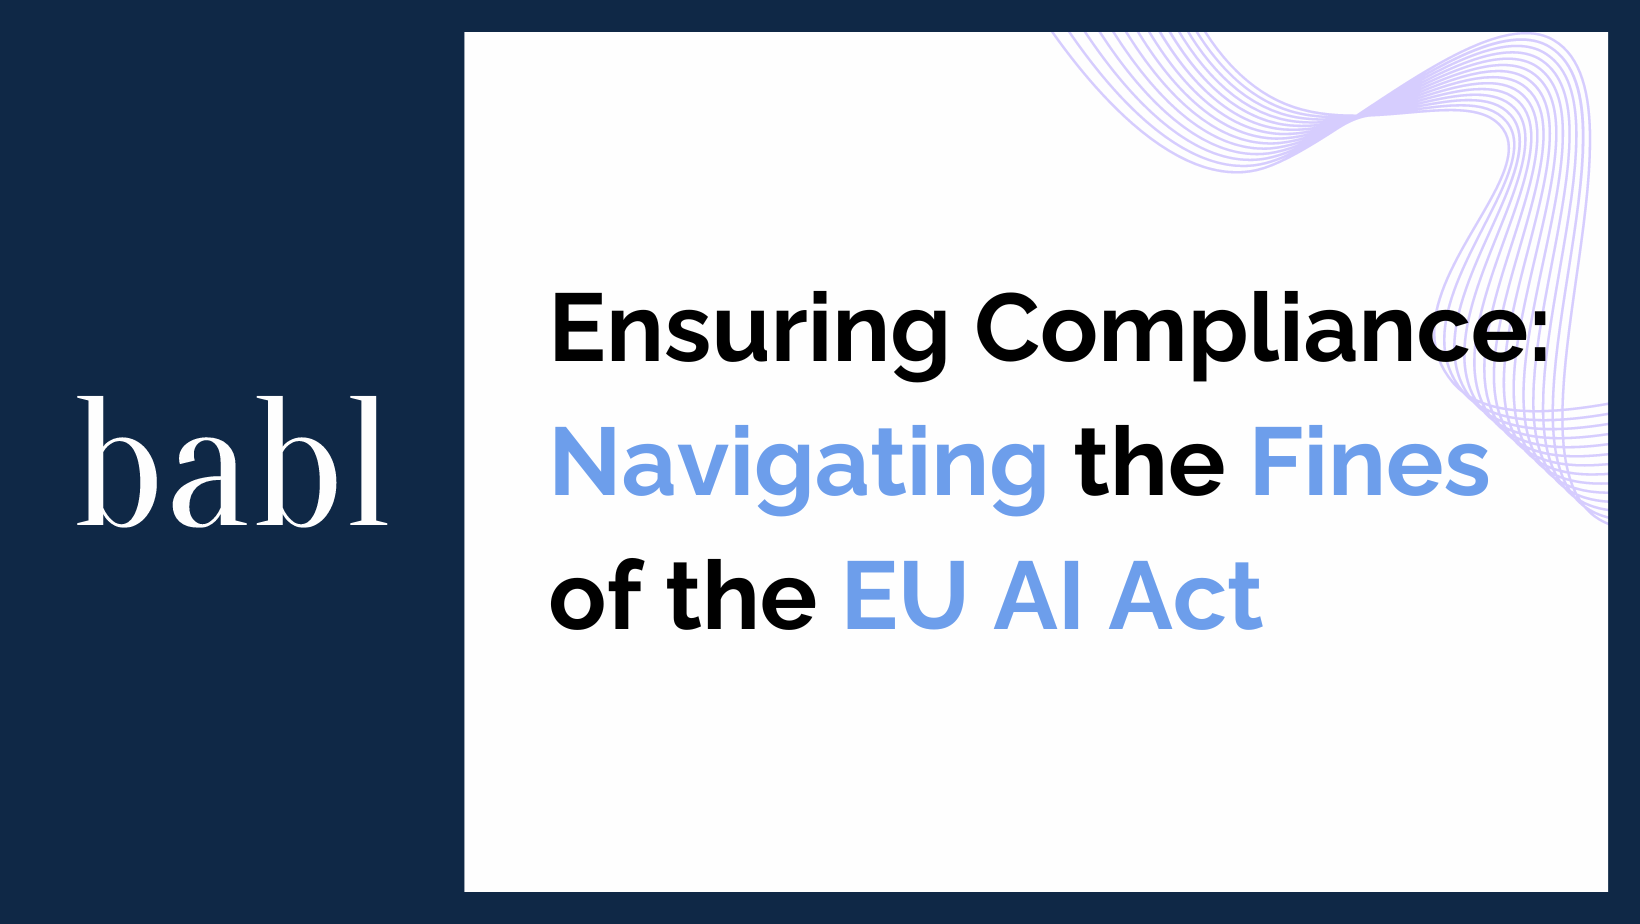 Ensuring Compliance: Navigating the Fines of the EU AI Act